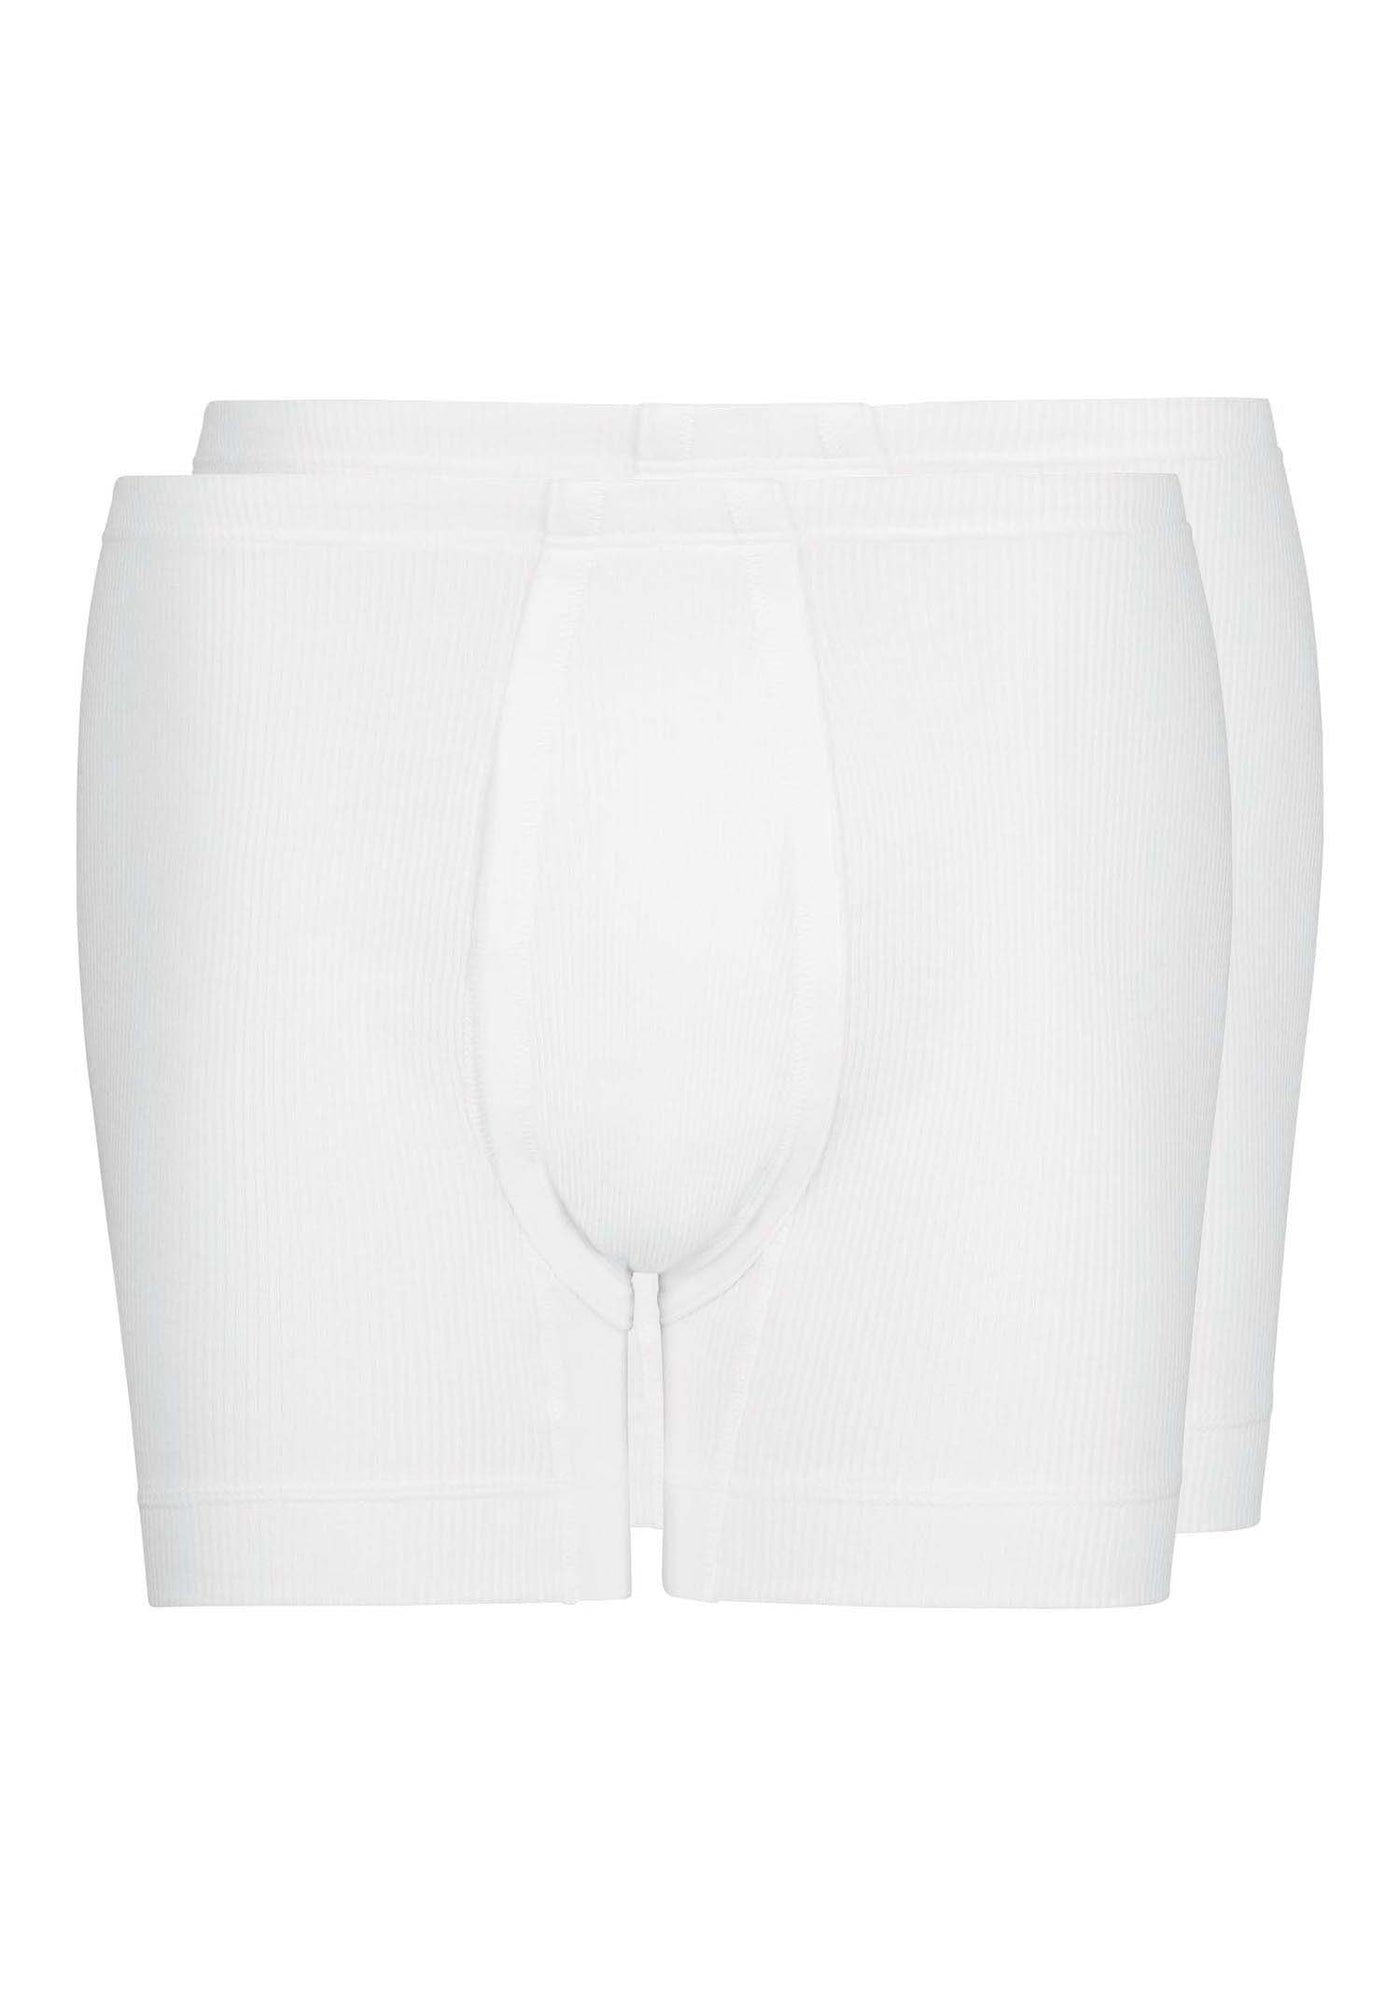 HUBER hautnah - Cotton Fine Rib - Boxershorts with fly 2 Pack